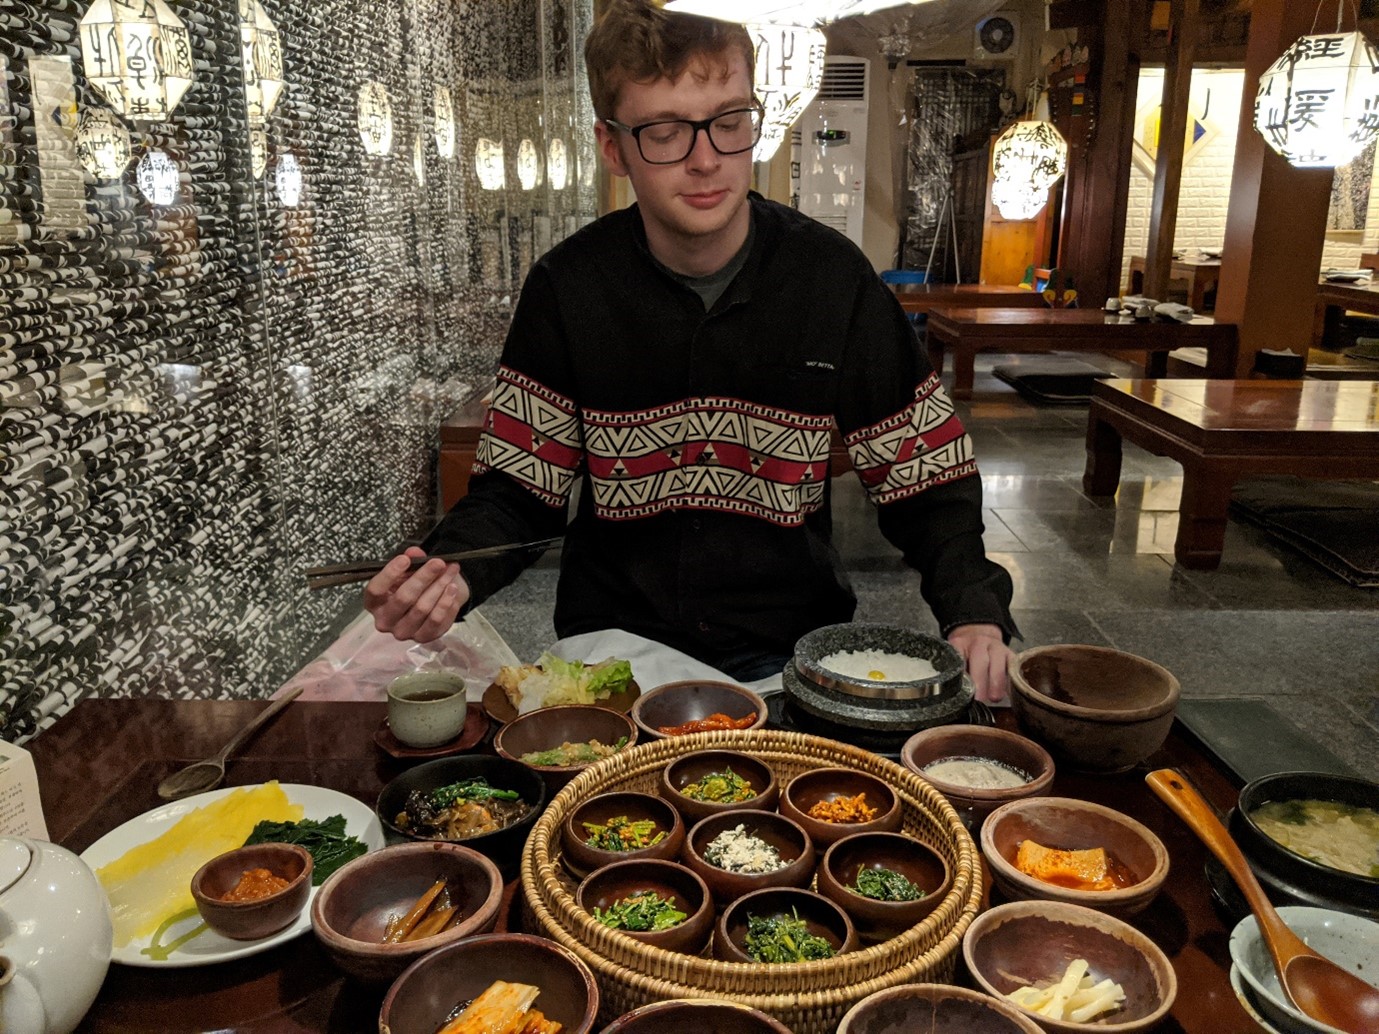 Calum Bell at a Buddhist vegetarian restaurant in South Korea with plates of food